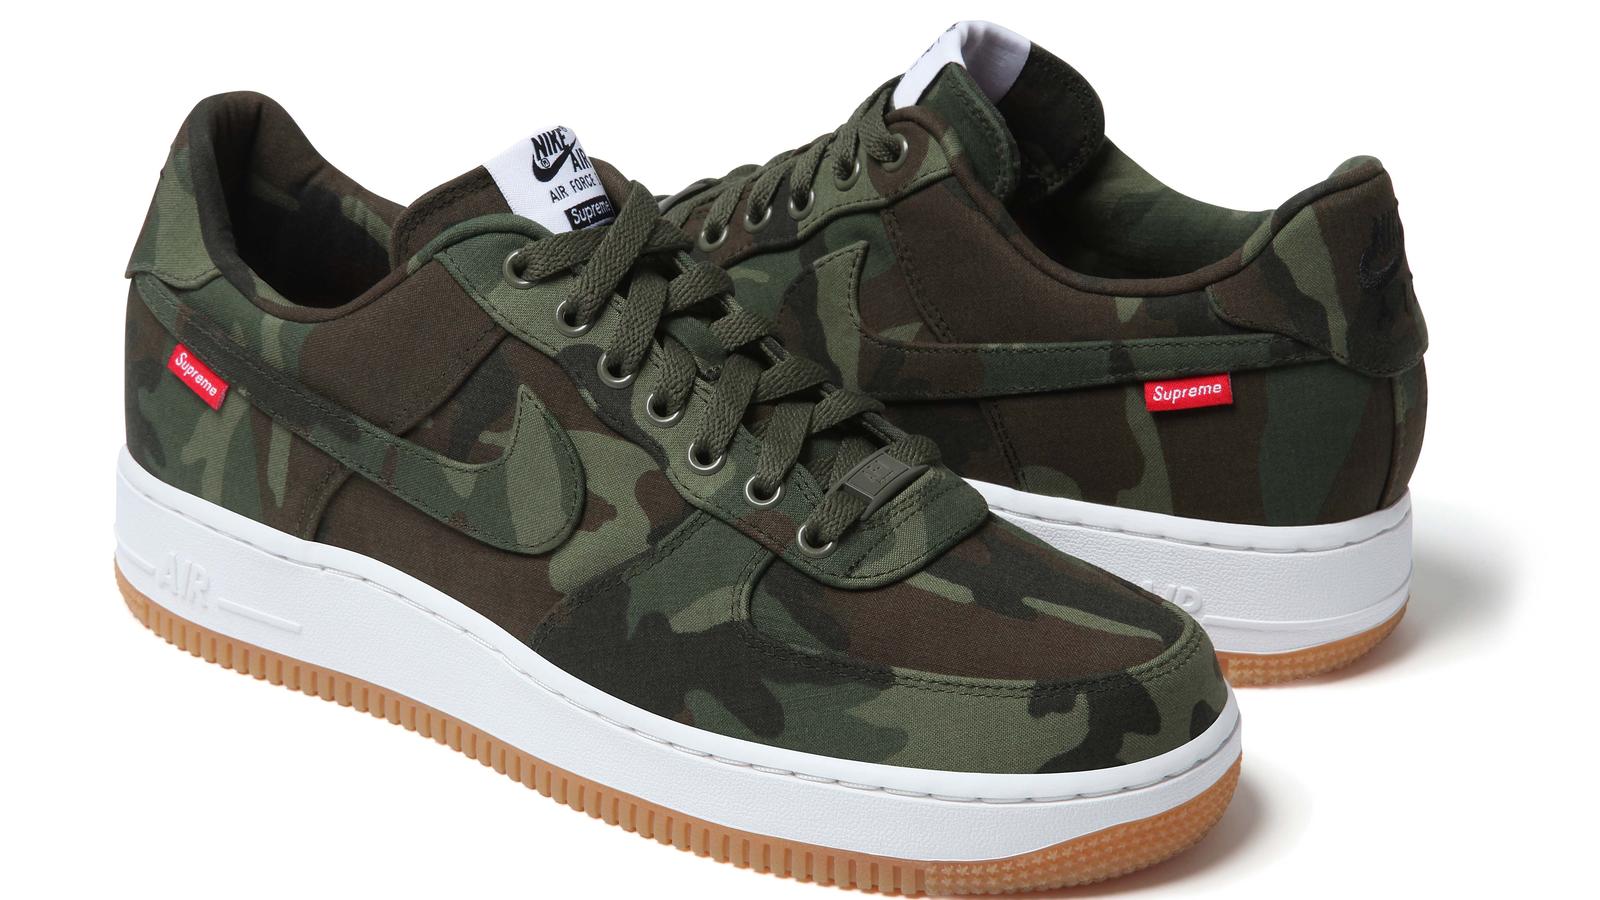 Nike Air Force 1 Supreme Camo Colorway - Air Force One Military , HD Wallpaper & Backgrounds